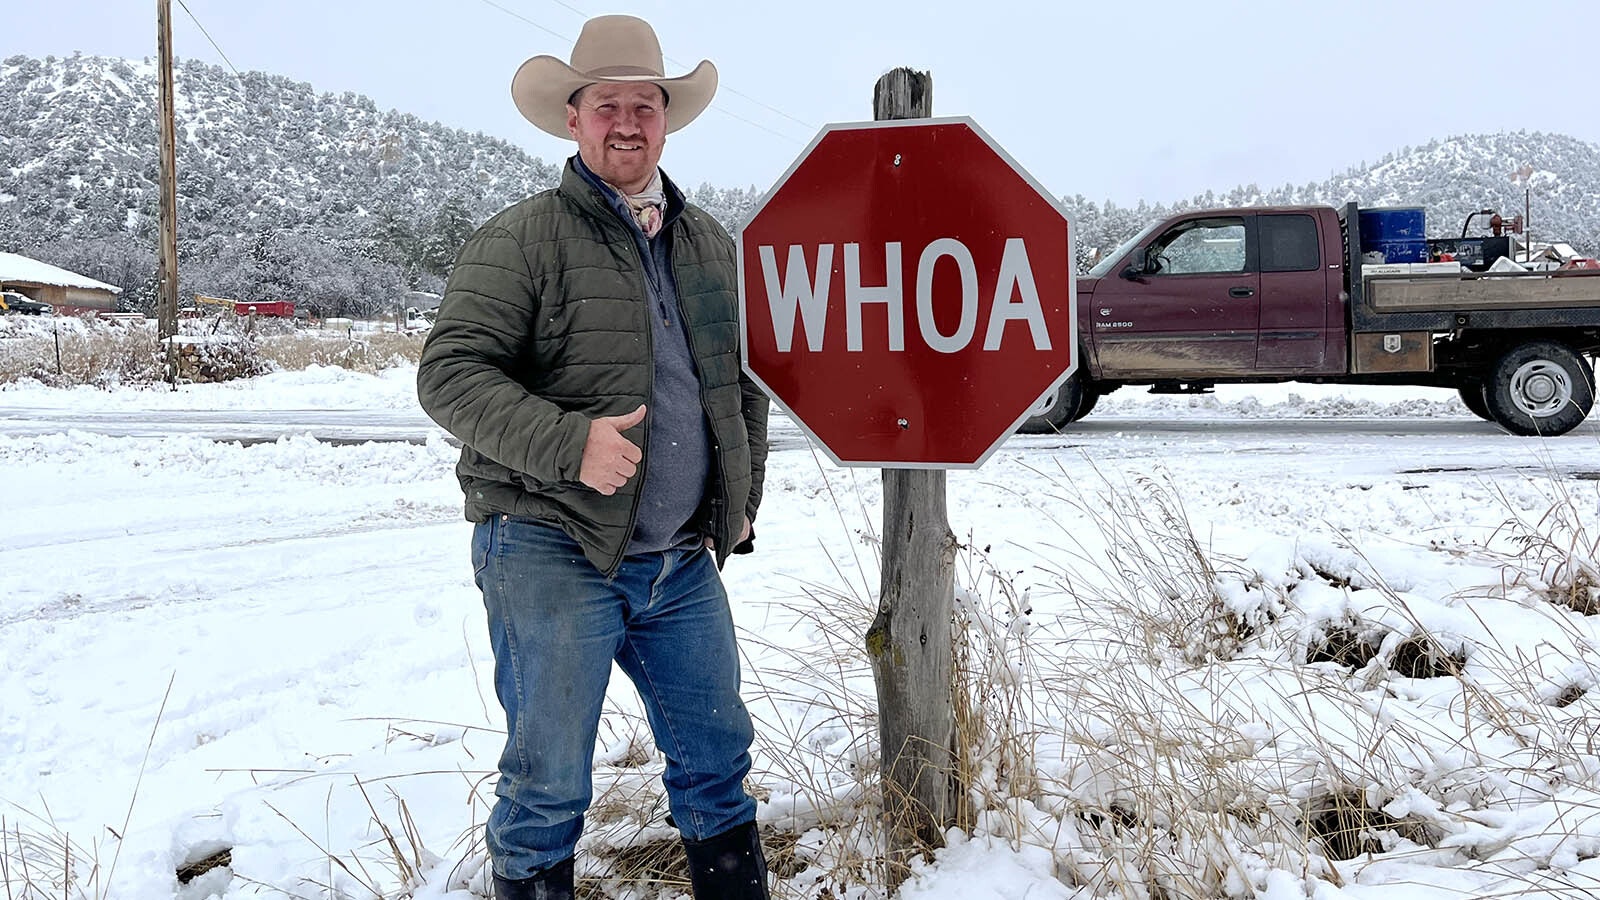 Dustin Cox is the mayor of tiny Alton Utah, which – true to its ranching roots – has “Whoa” signs instead of stop signs.